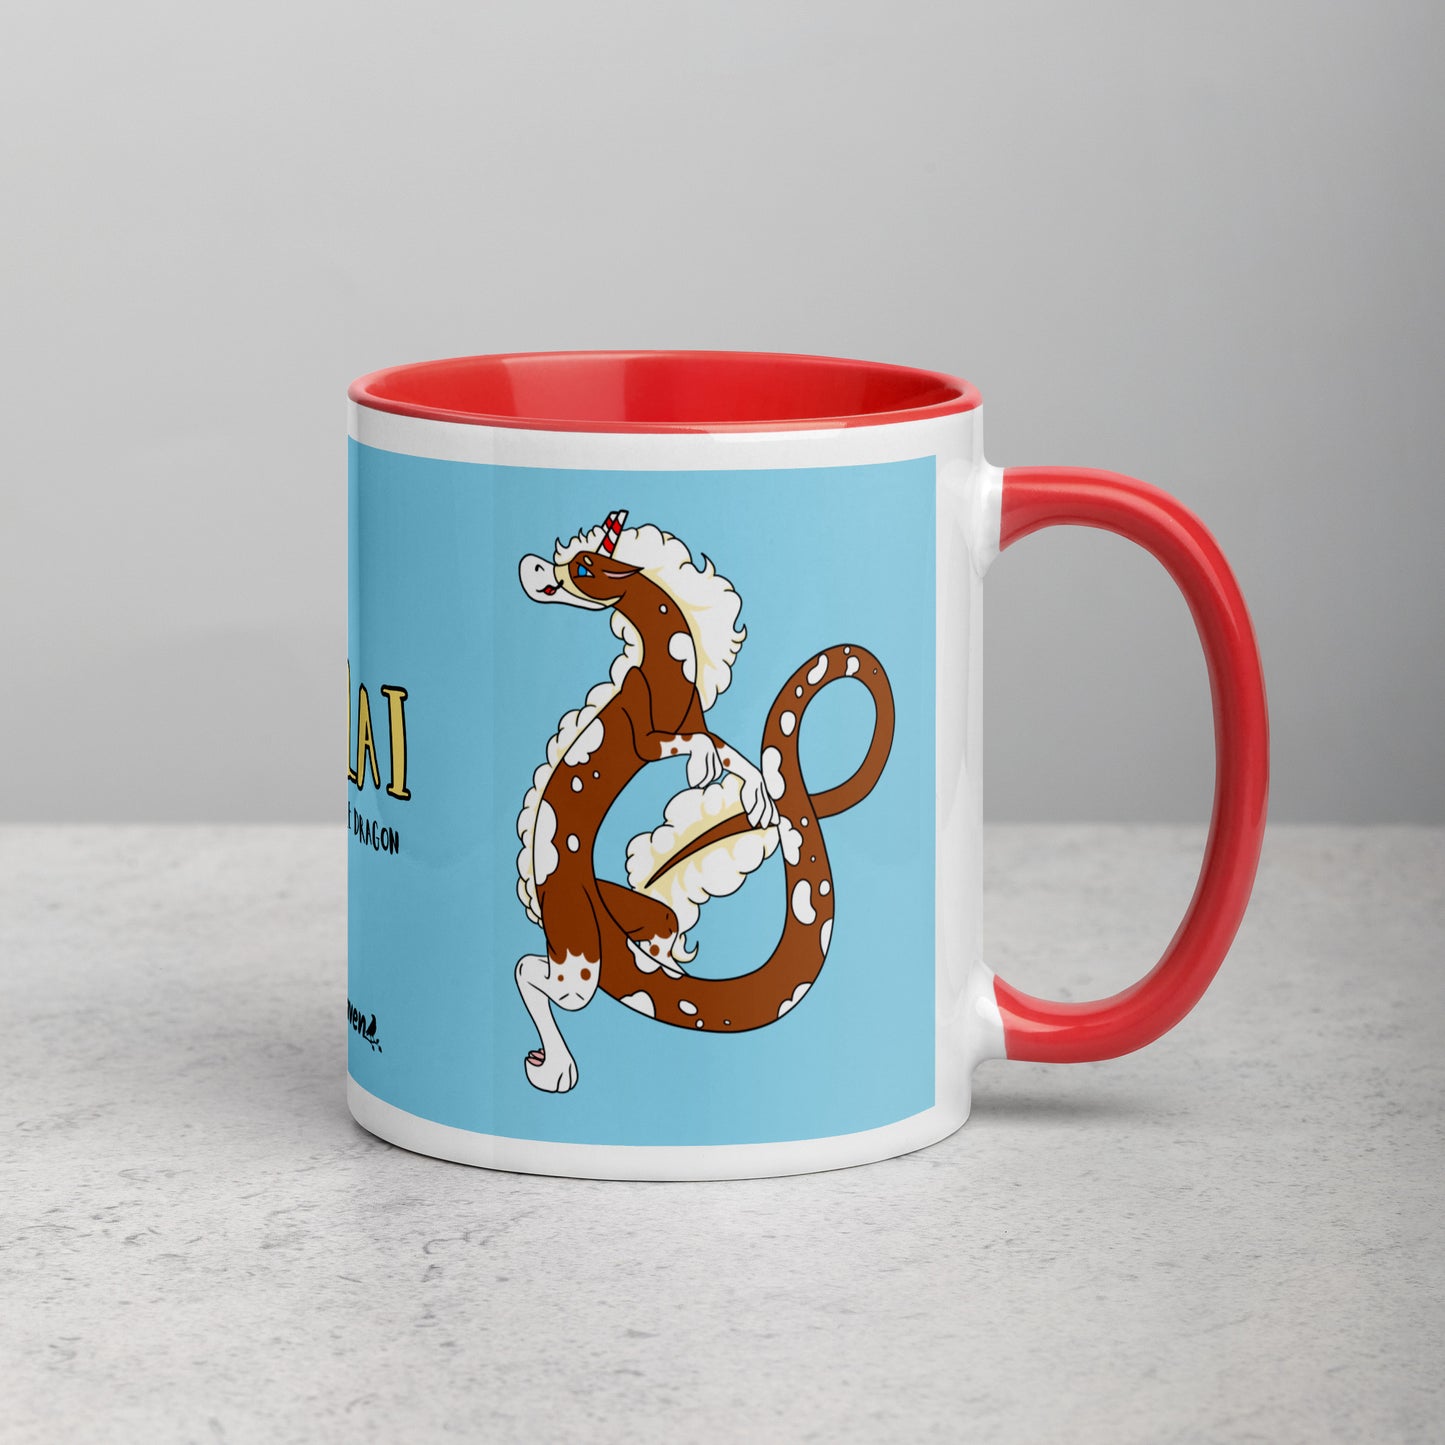 11 ounce ceramic mug with red handle, rim and inside color. Features double-sided image of Nikolai the Fuzzy Noodle Root beer float dragon on a light blue background. Mug is microwave and dishwasher safe.